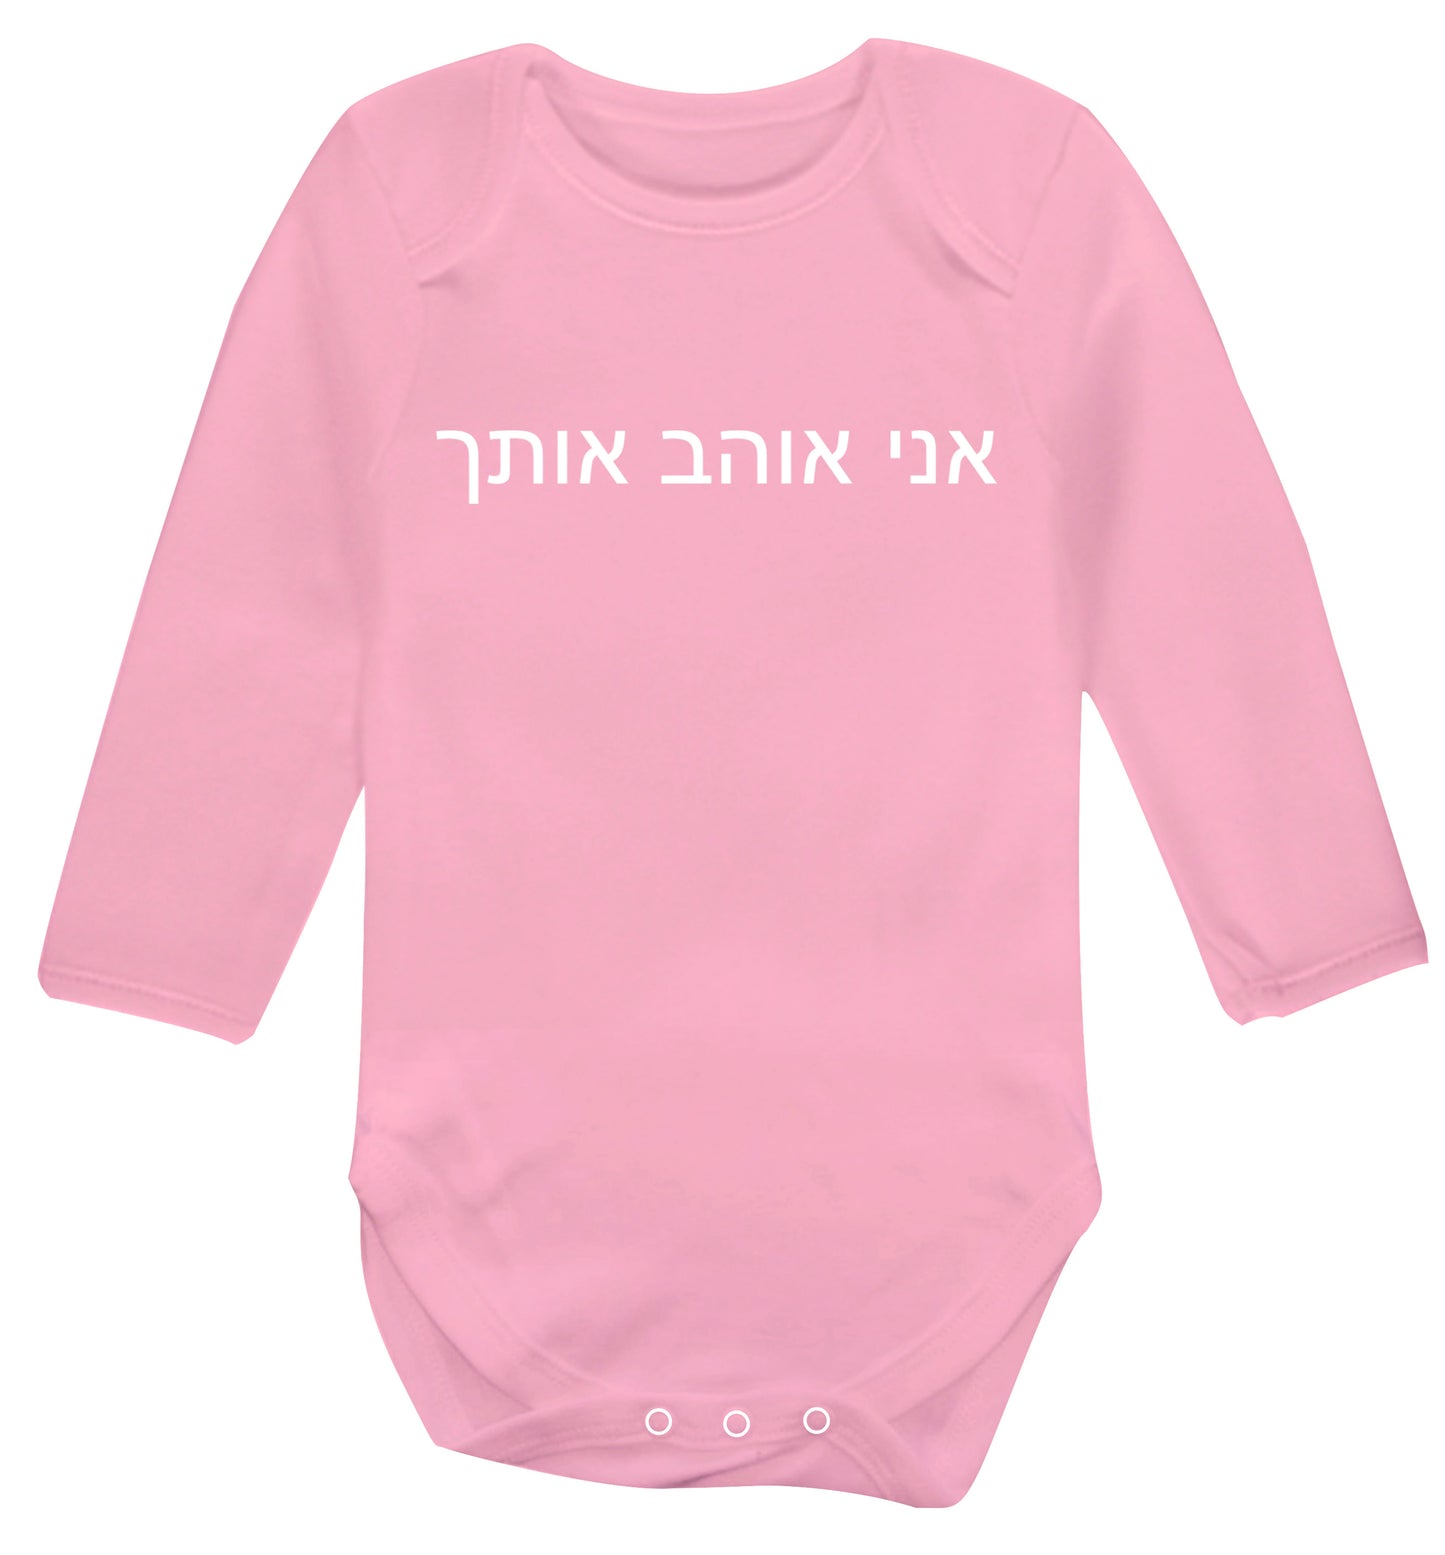 ___ ____ ____ - I love you Baby Vest long sleeved pale pink 6-12 months